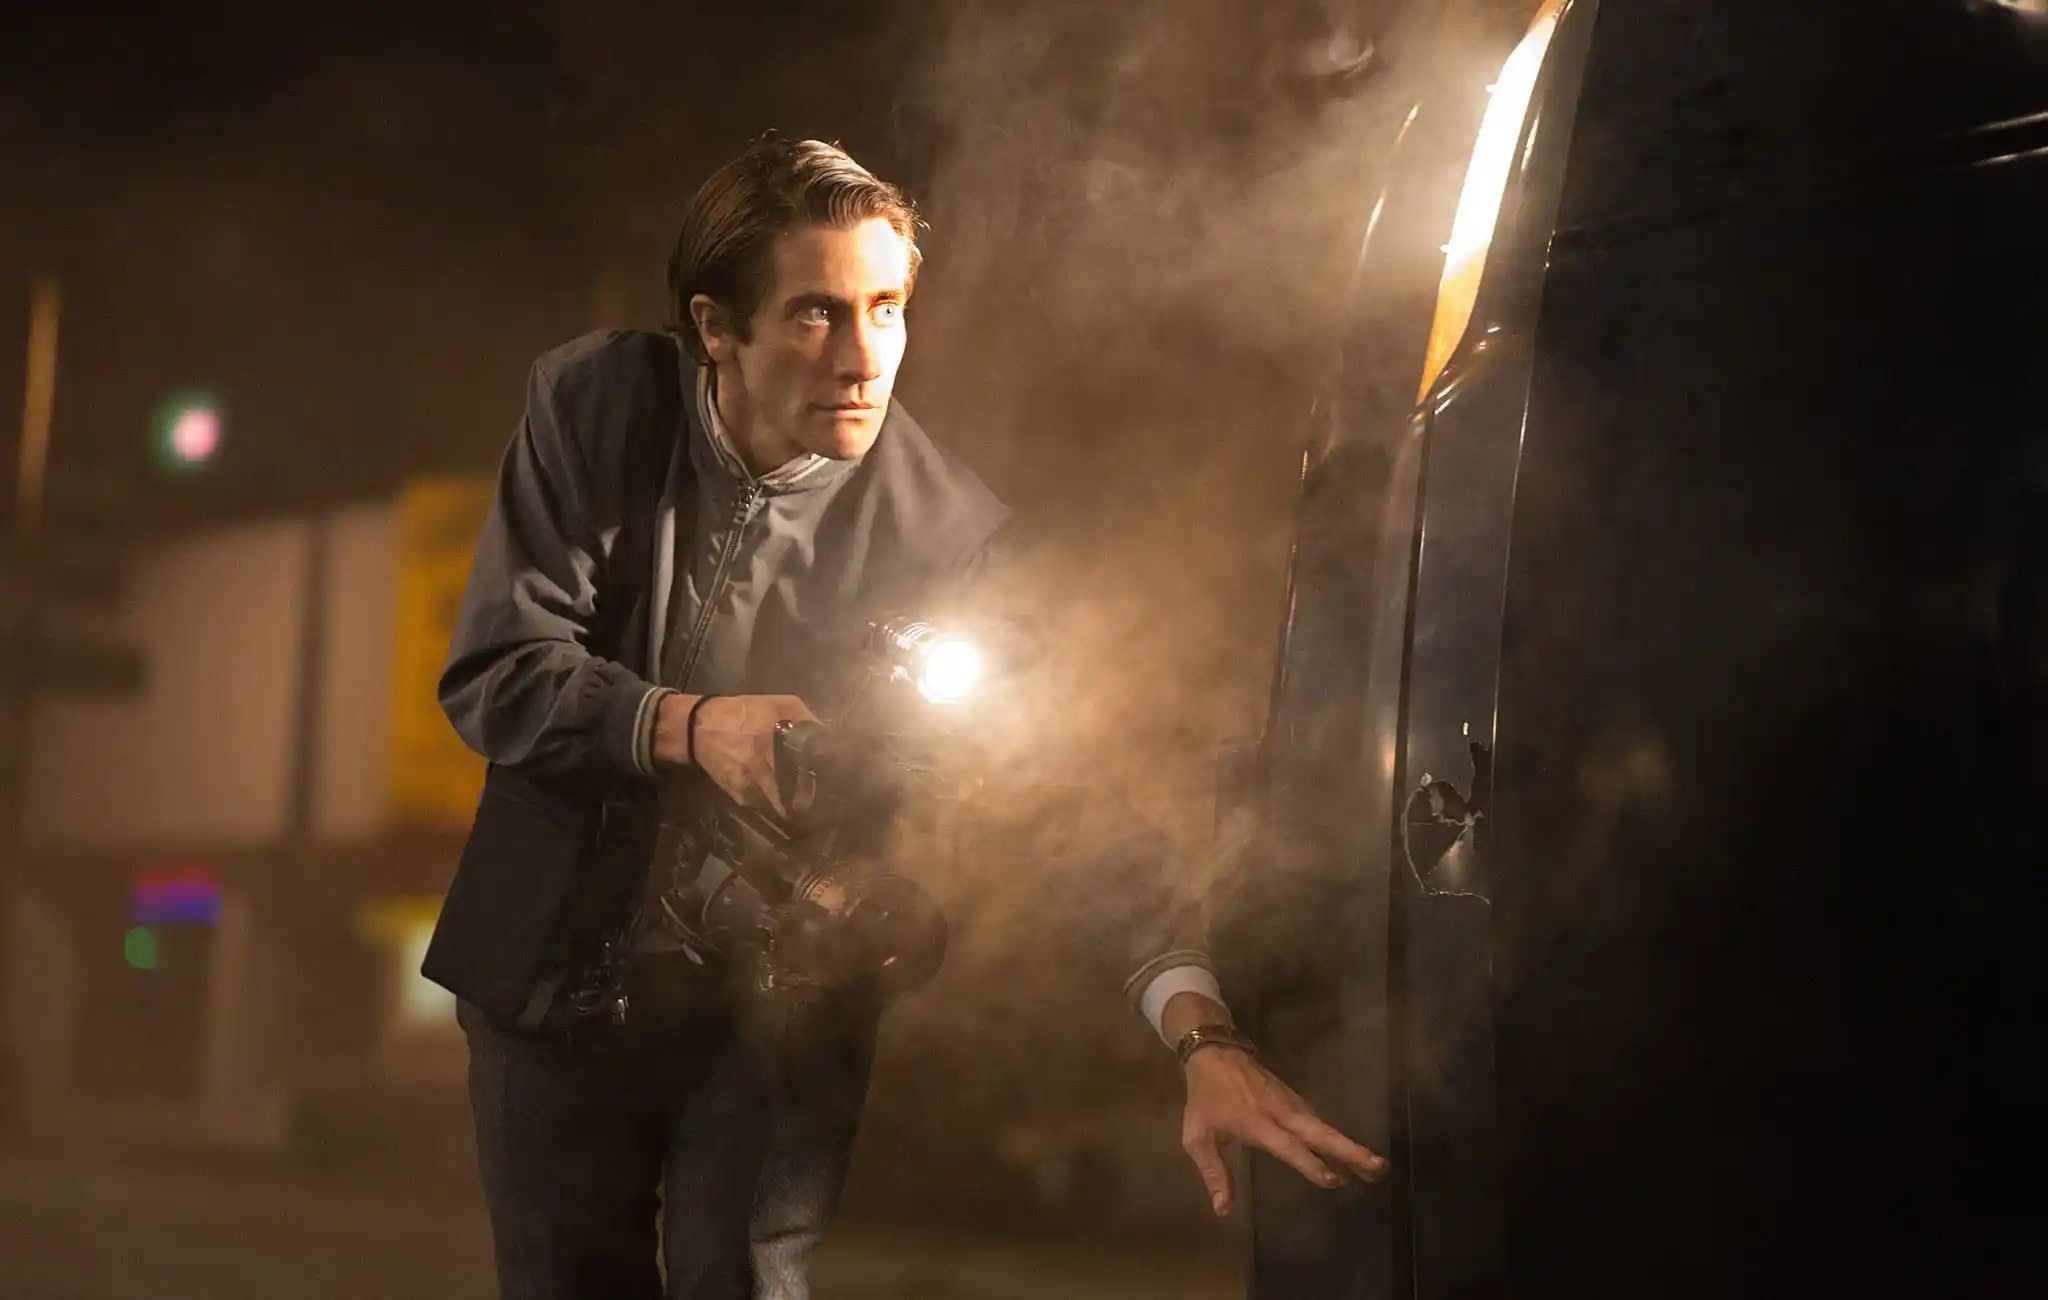 Nightcrawler Offers Us a Metaphorical Vampire with a Viewfinder